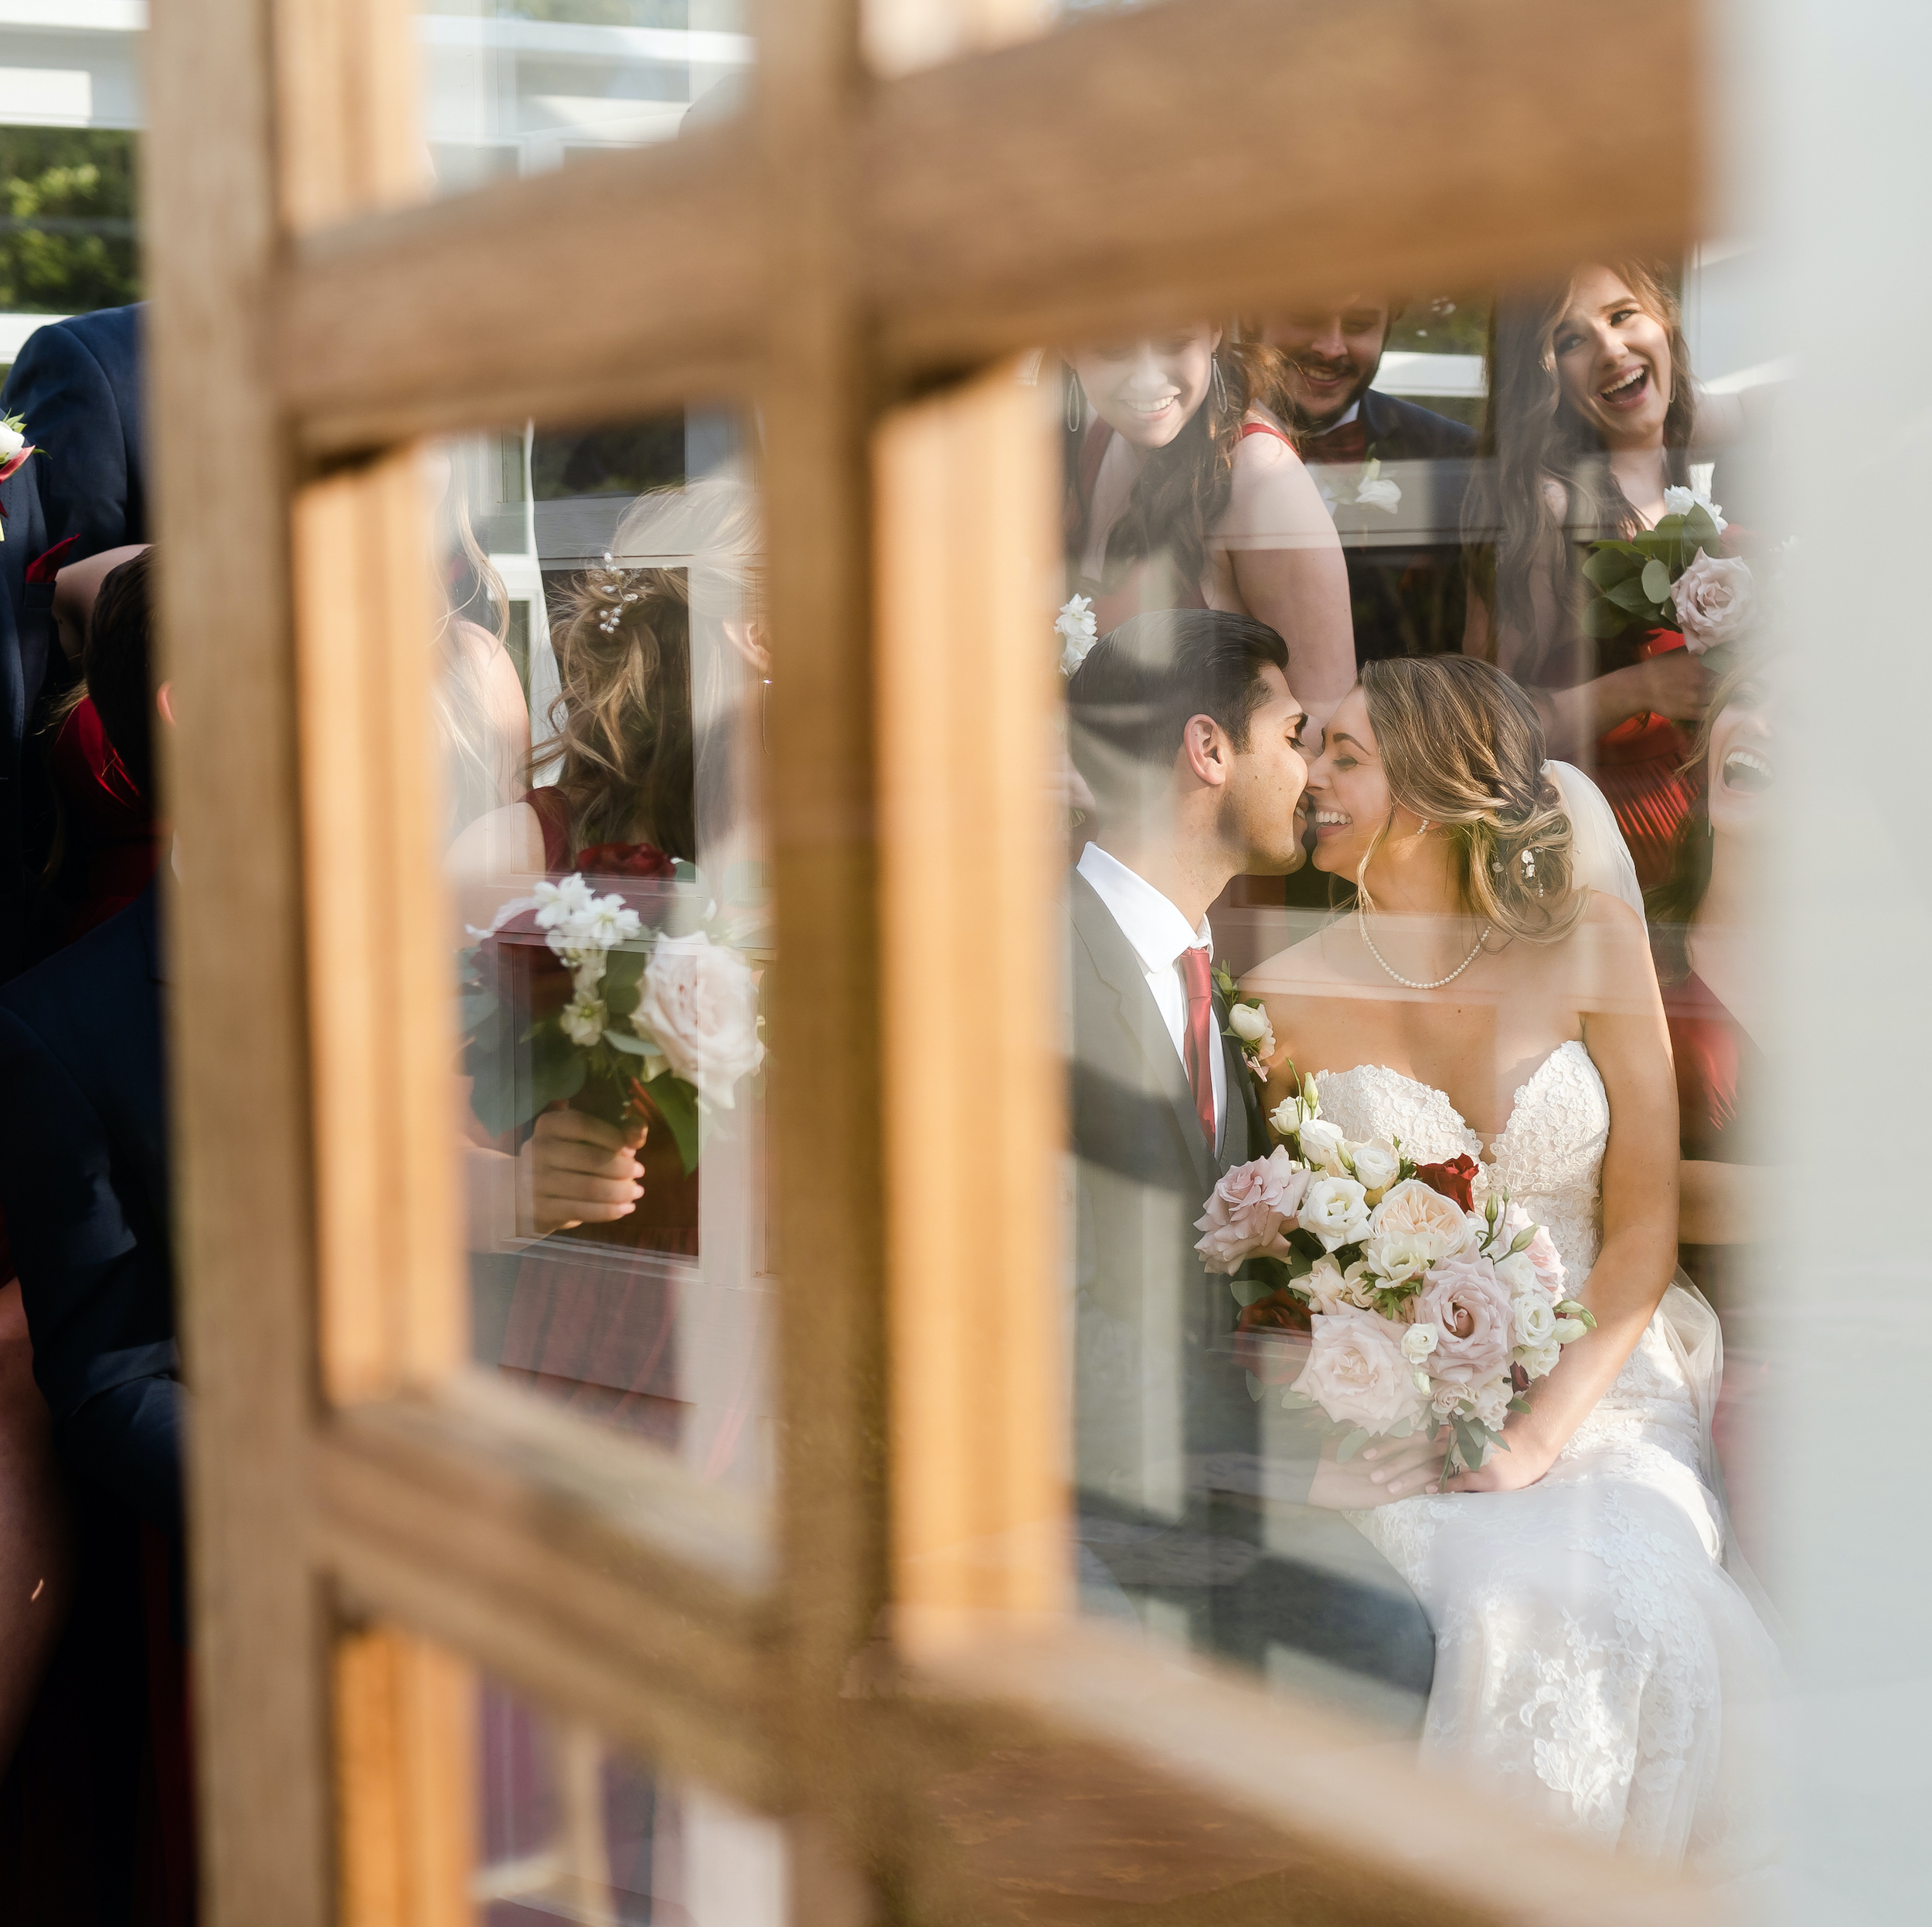 Through the window of a door, you can see the bride and groom smile and kiss while sitting with their wedding party.